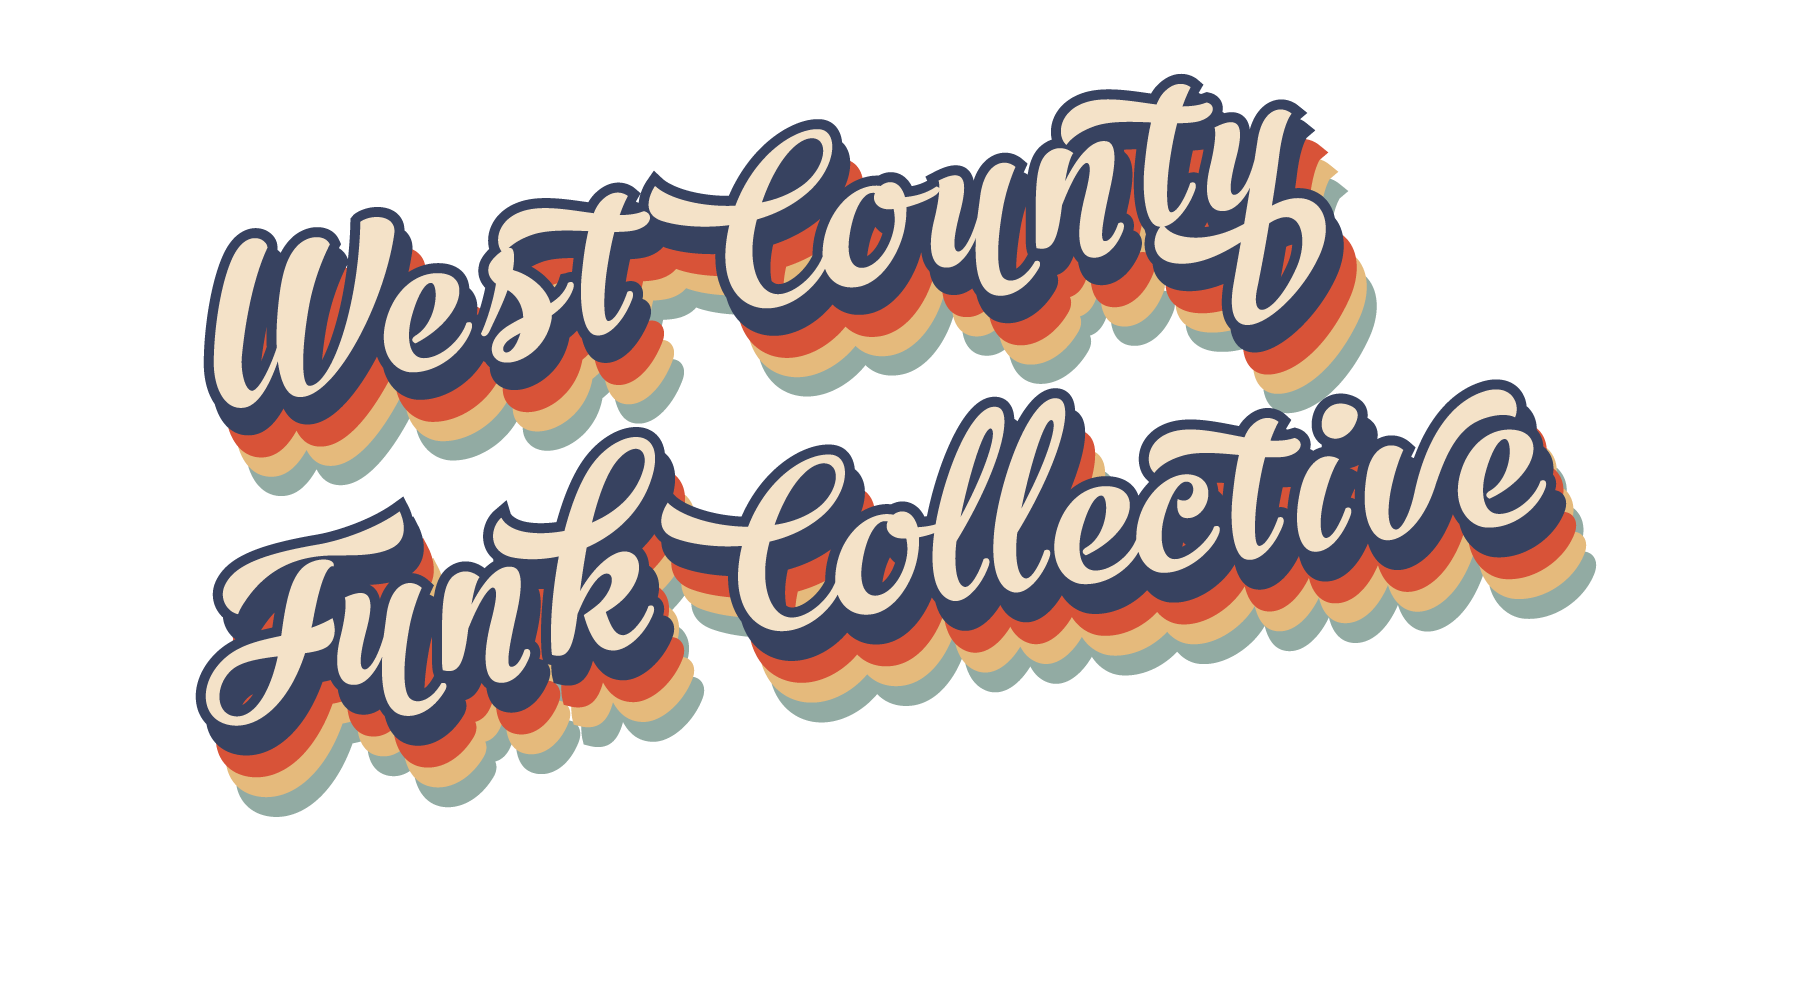 West County Funk Collective